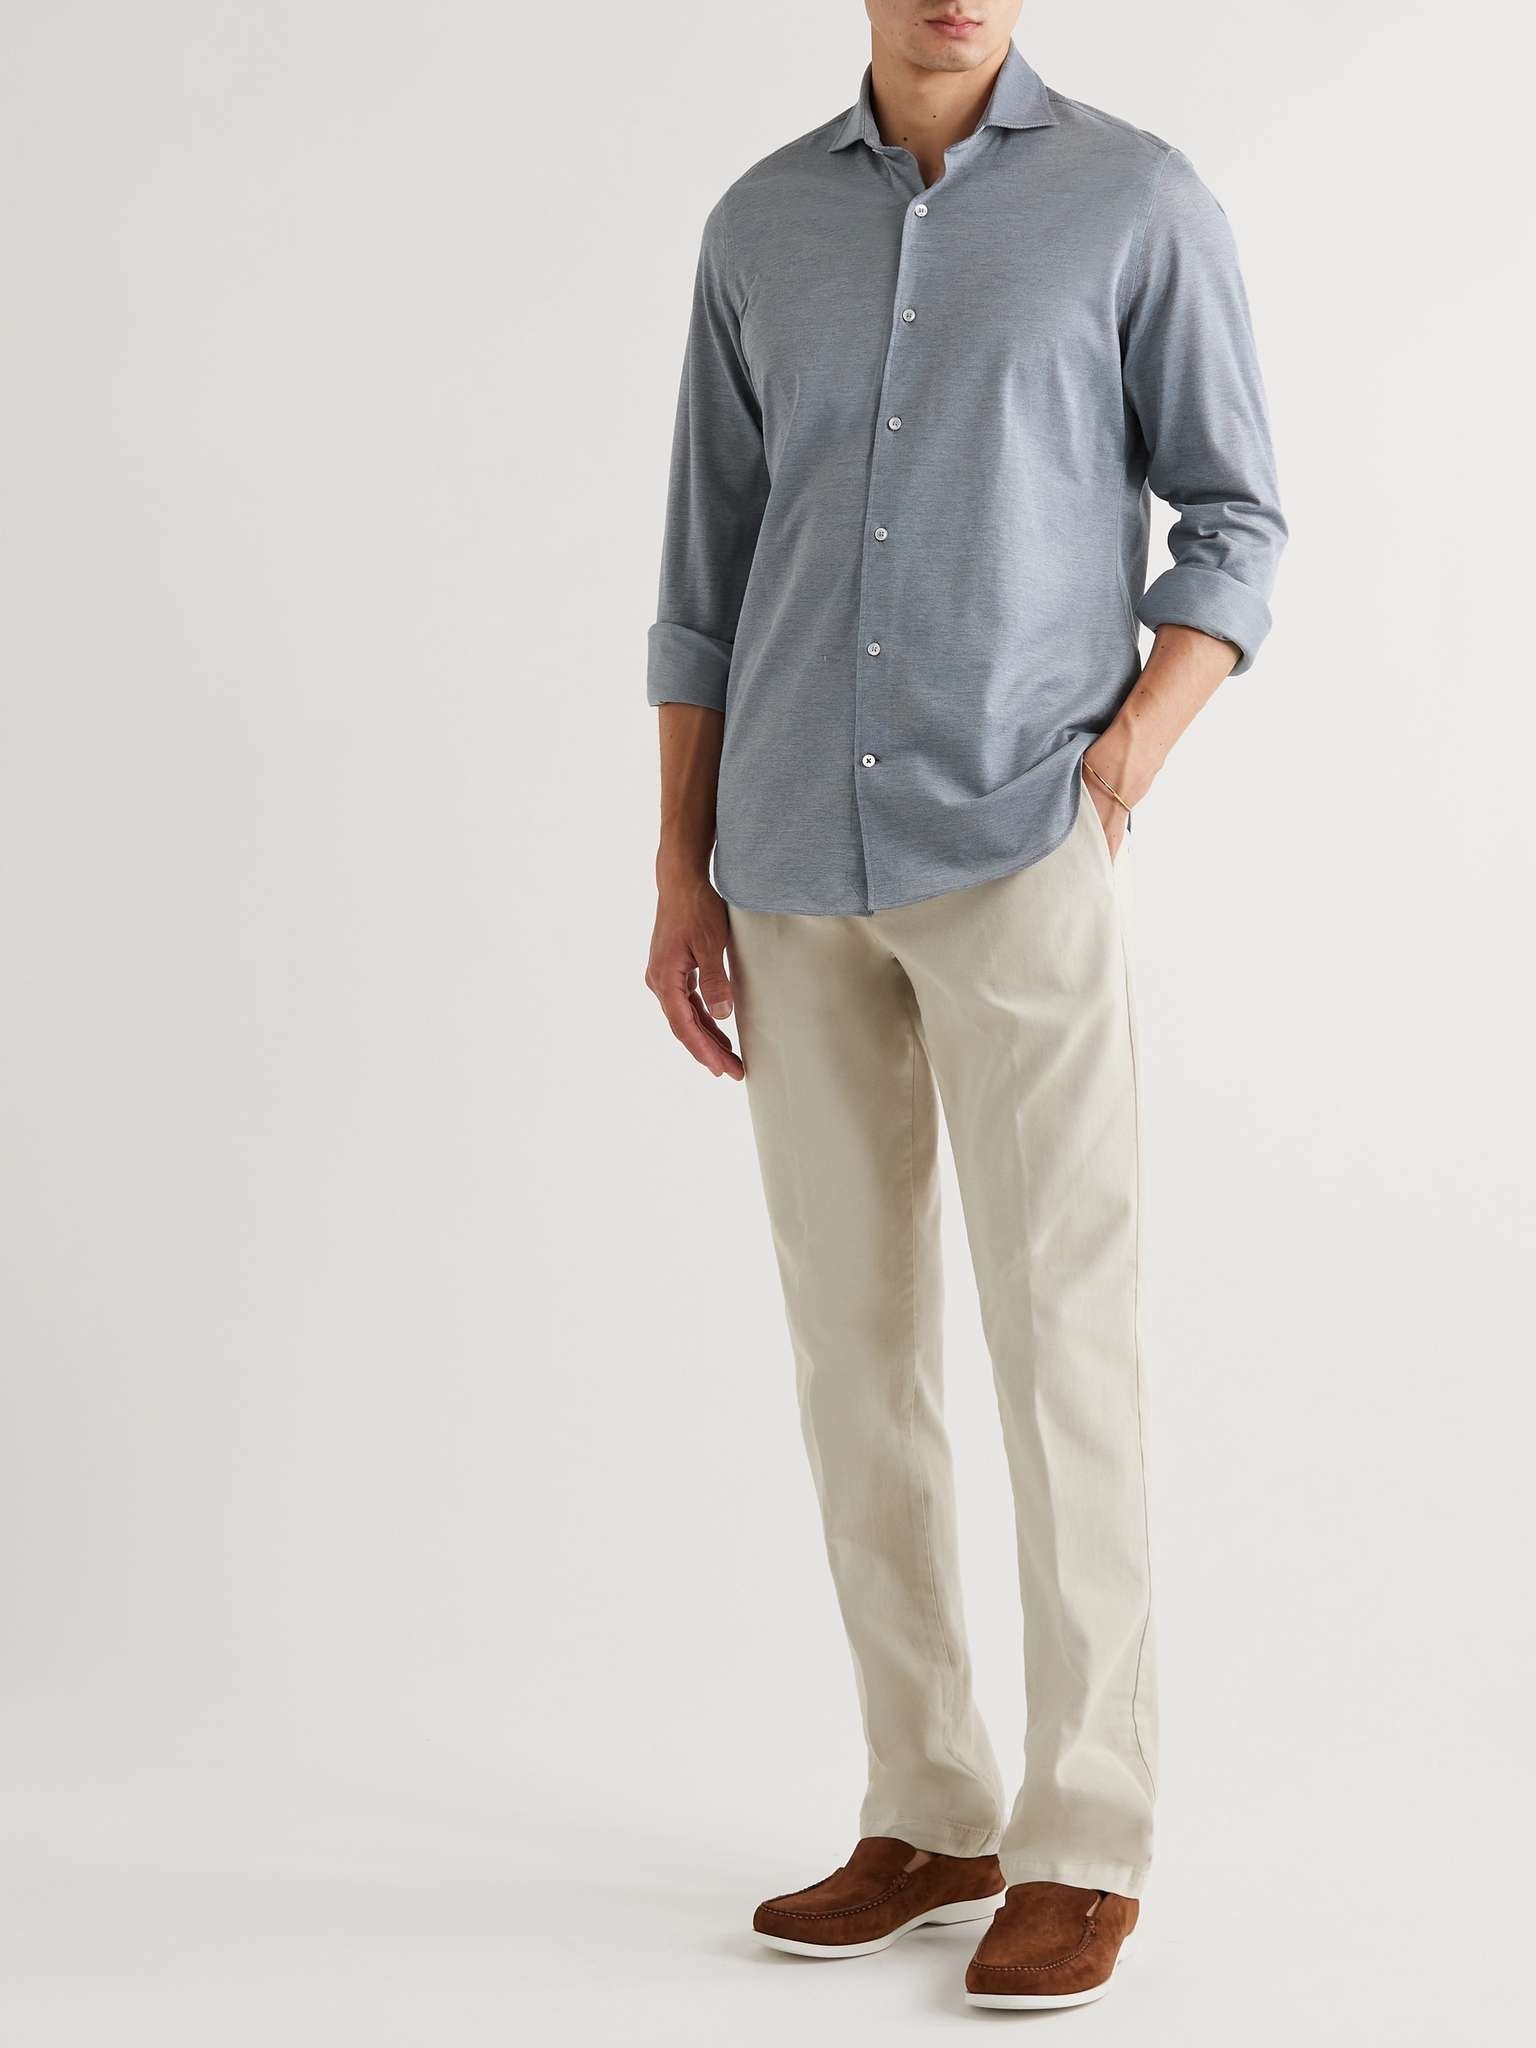 Andrew Cotton Oxford Shirt - 2